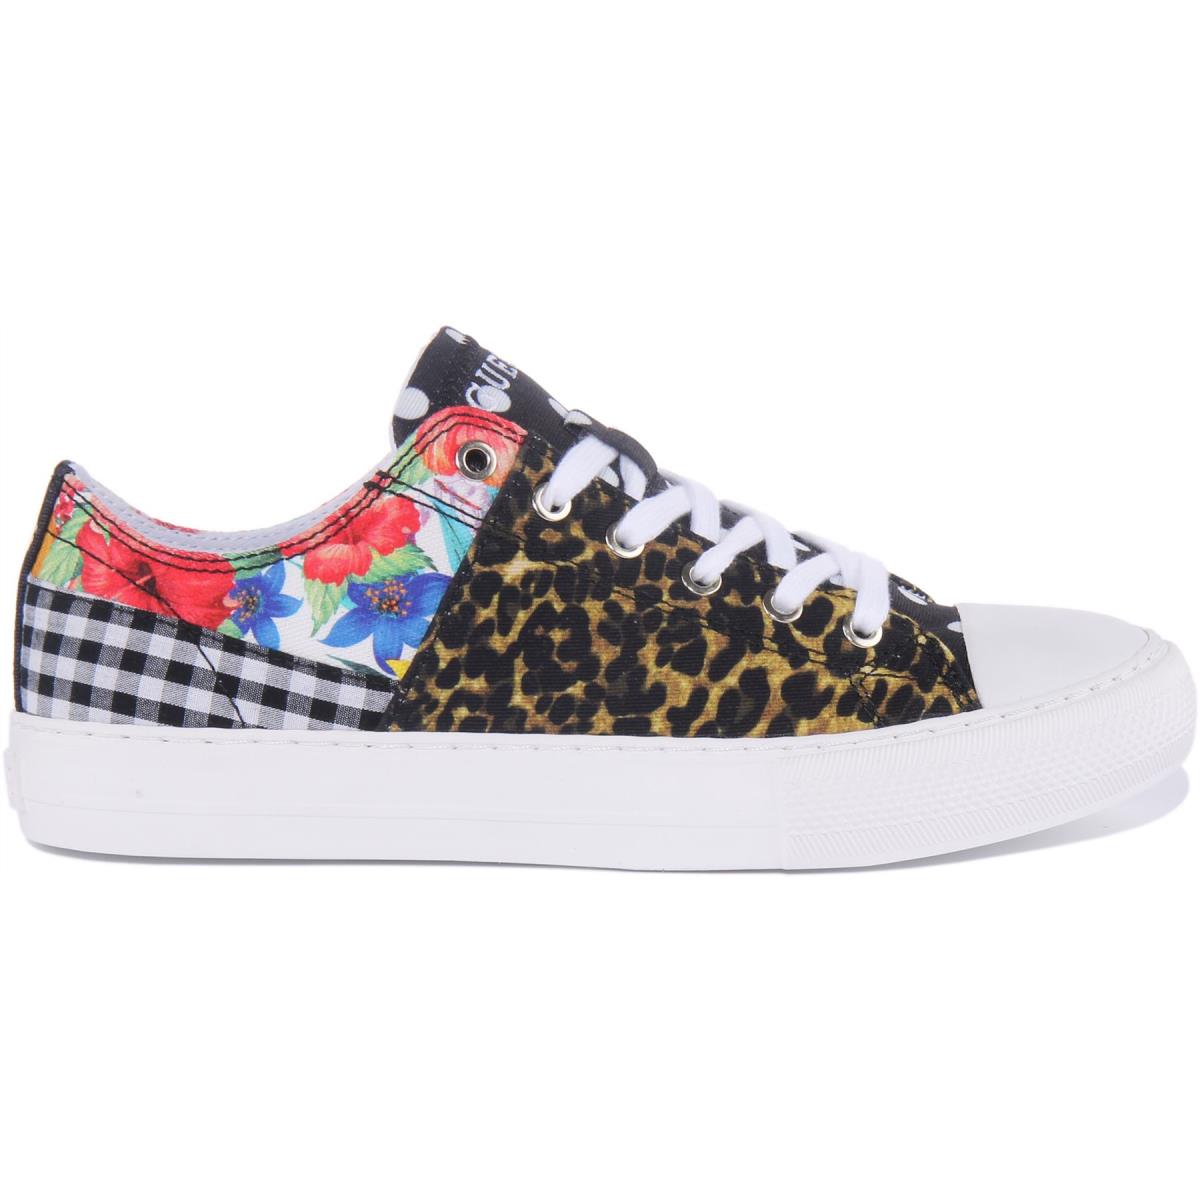 Guess Fl6P3Zfap12 Pranz3 Womens Lace Up Sneakers In Multi Colo Size US 5 - 11